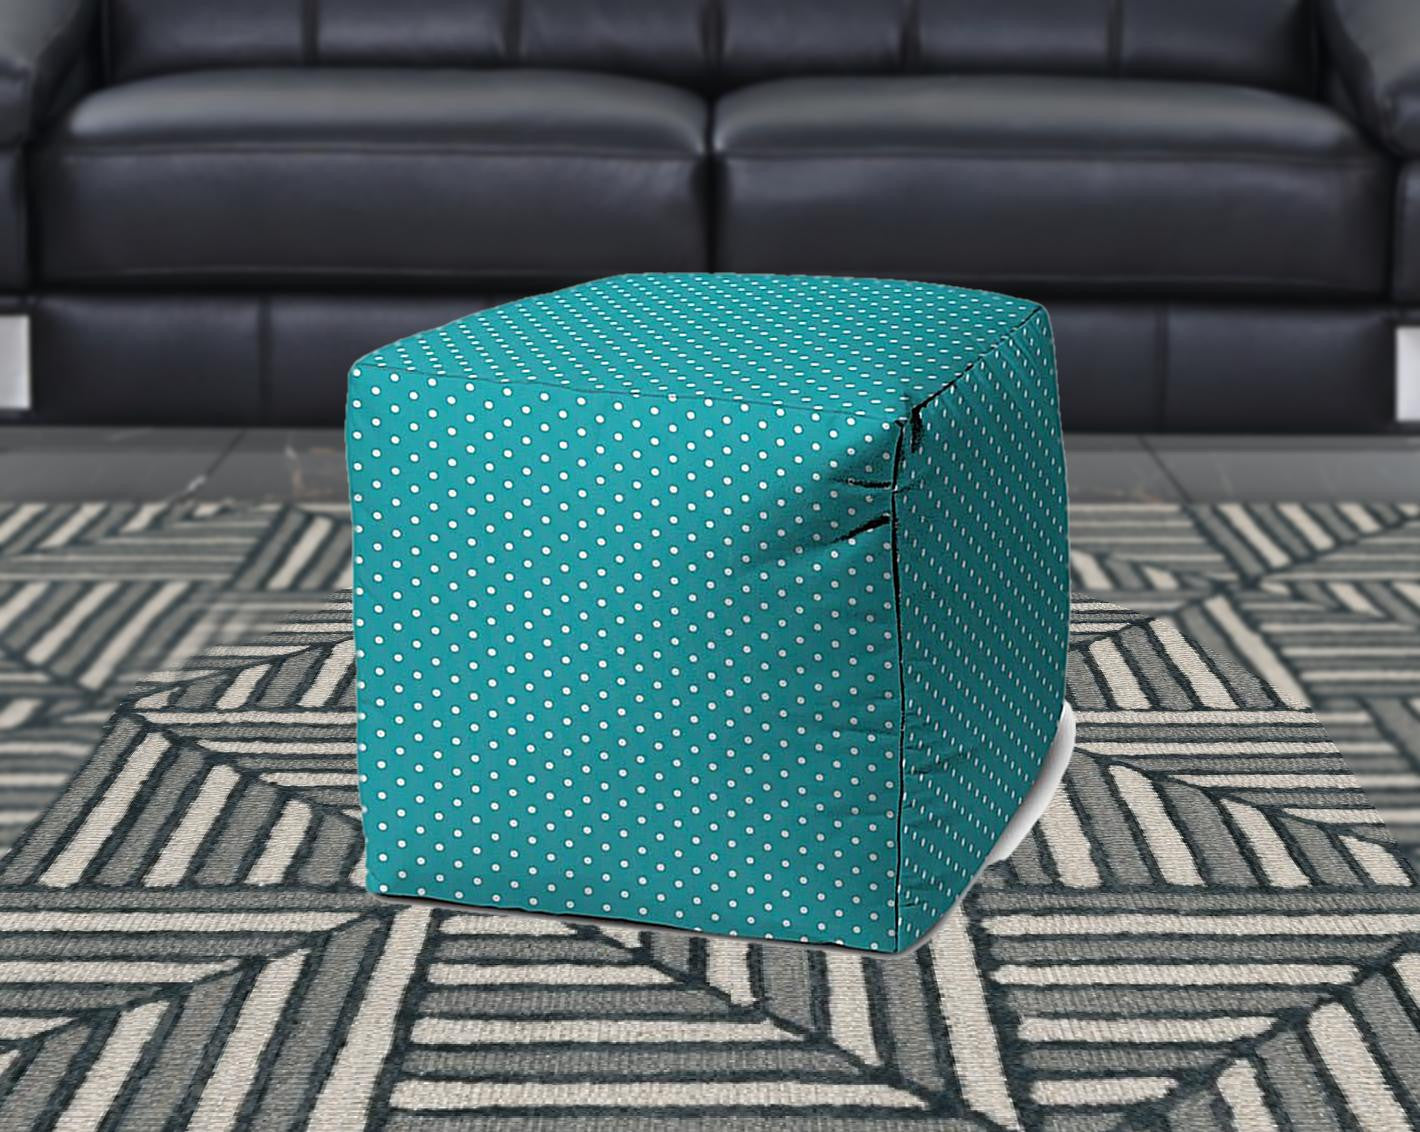 17" Yellow Polyester Cube Polka Dots Indoor Outdoor Pouf Ottoman